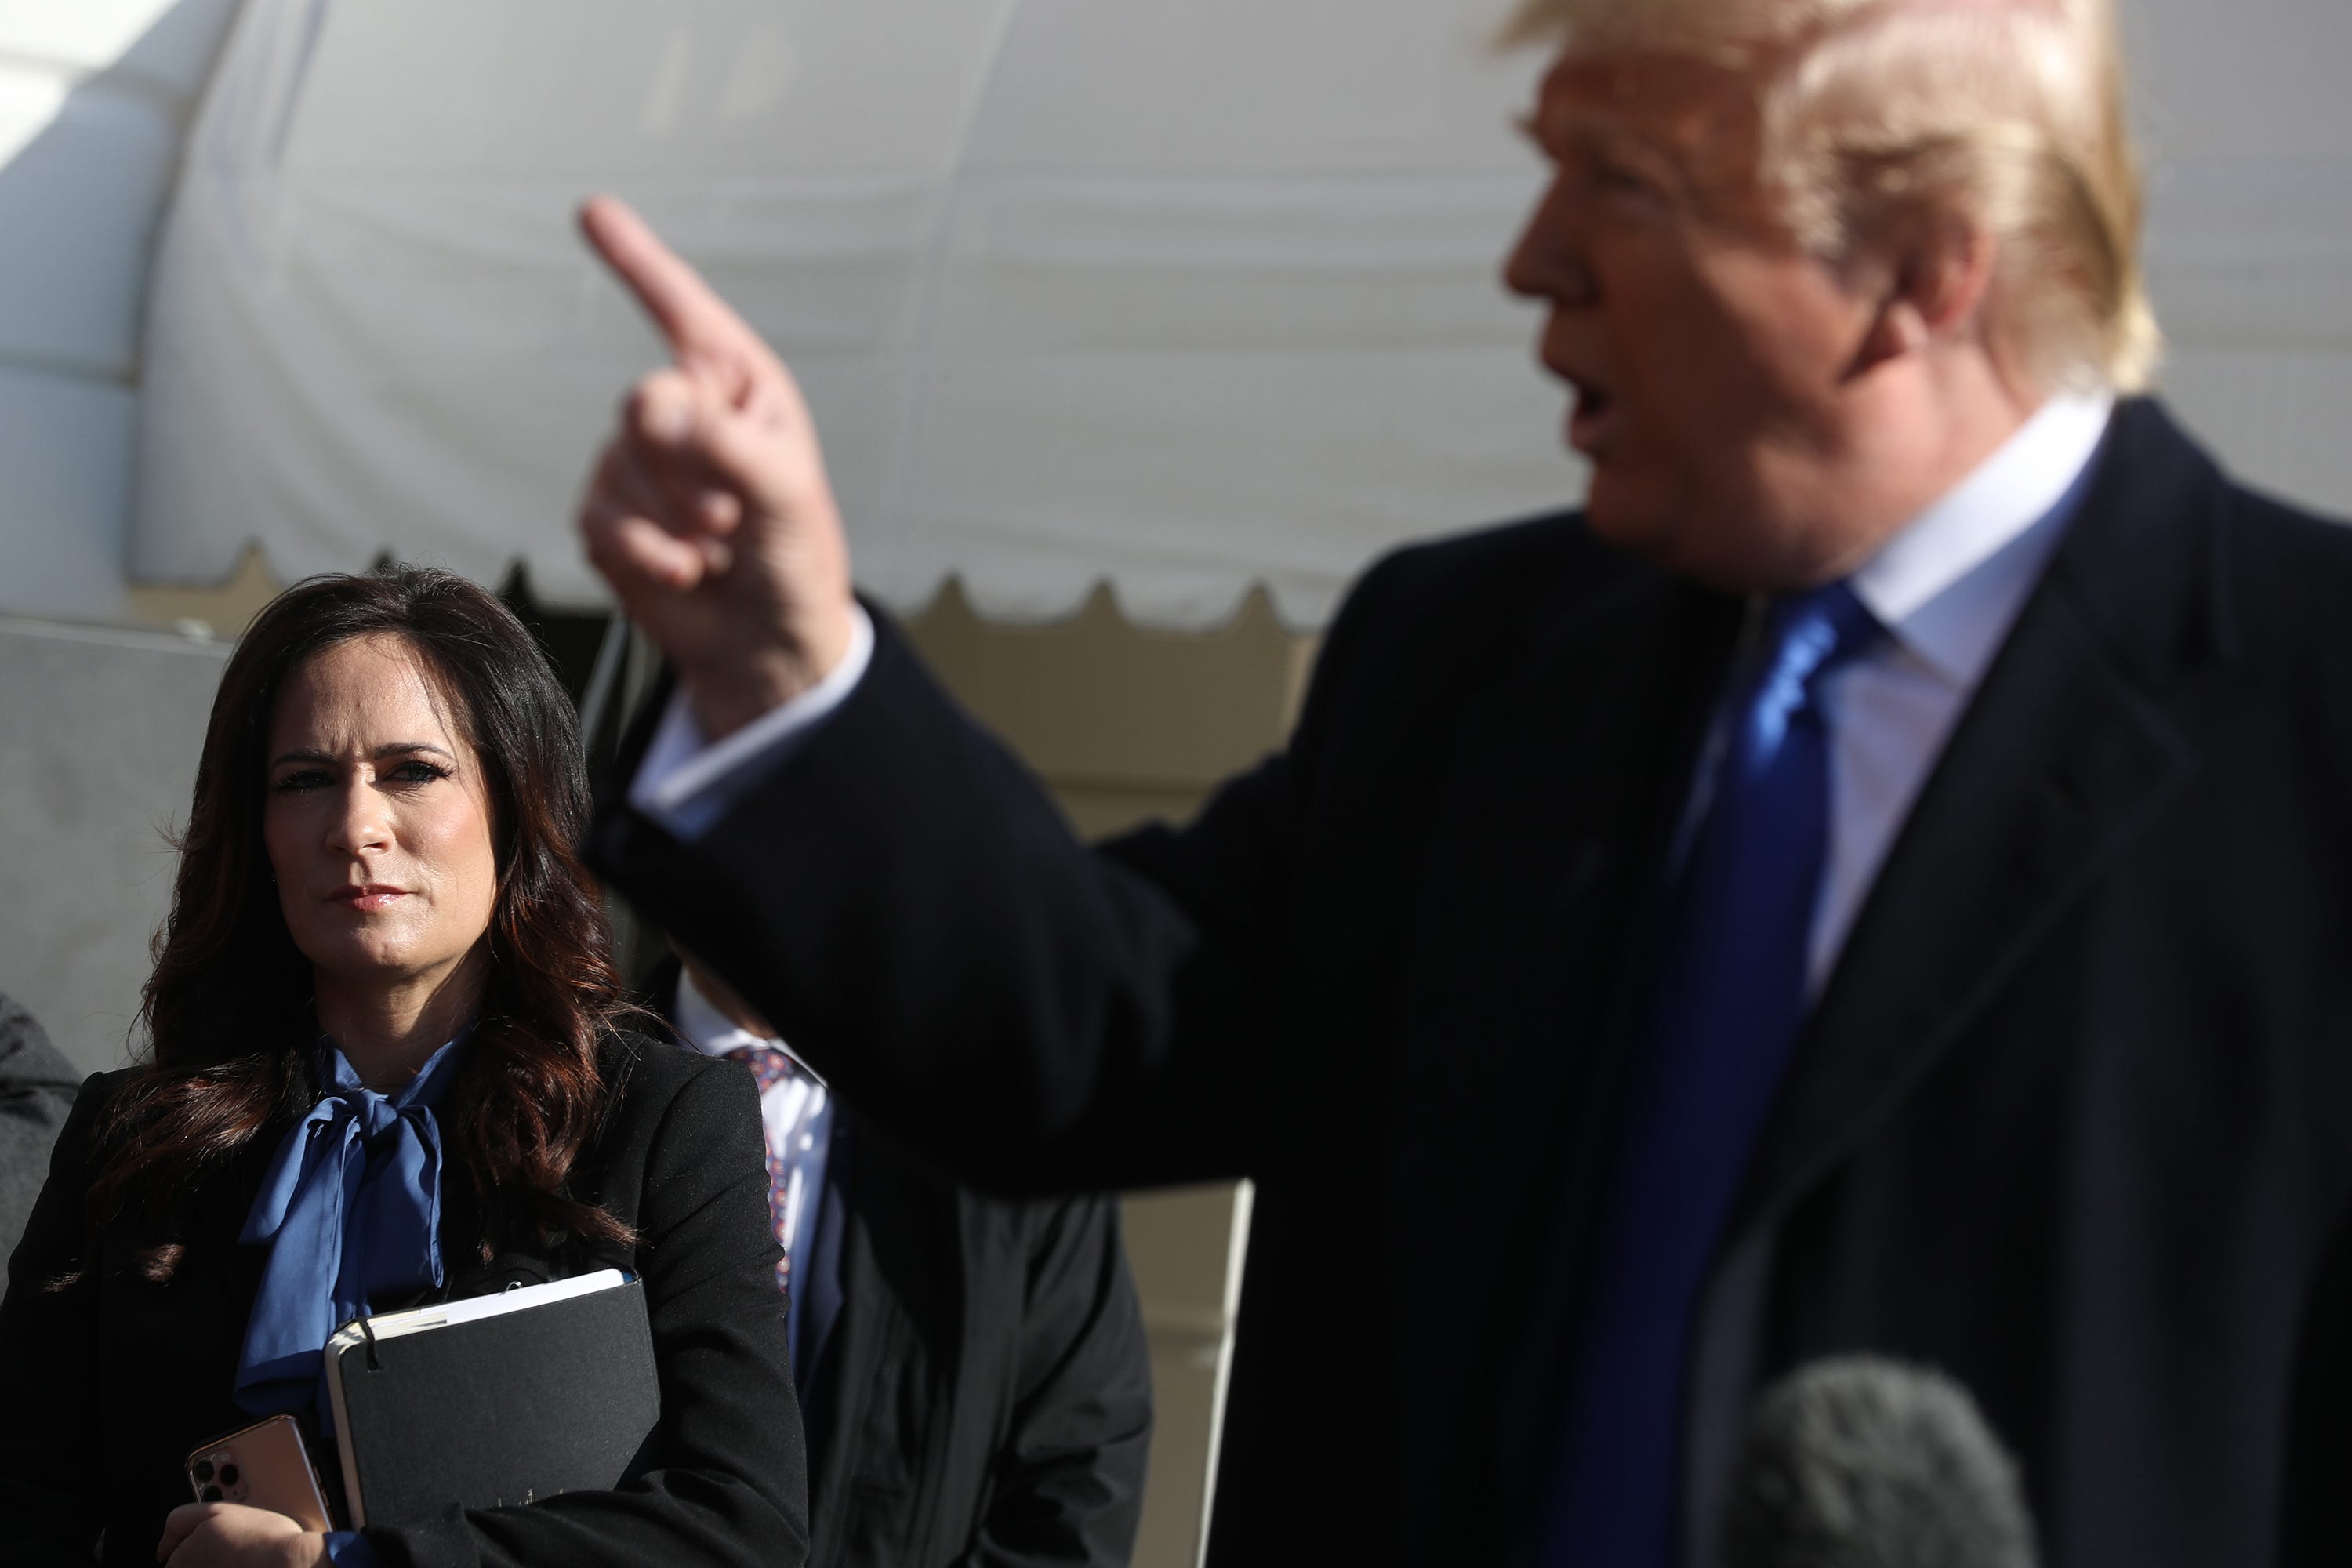 White House press secretary Stephanie Grisham, left, listens to President Donald Trump talk to reporters before he boards Marine One at the White House on Nov. 8, 2019, in Washington, D.C. (Chip Somodevilla/Getty Images/TNS)